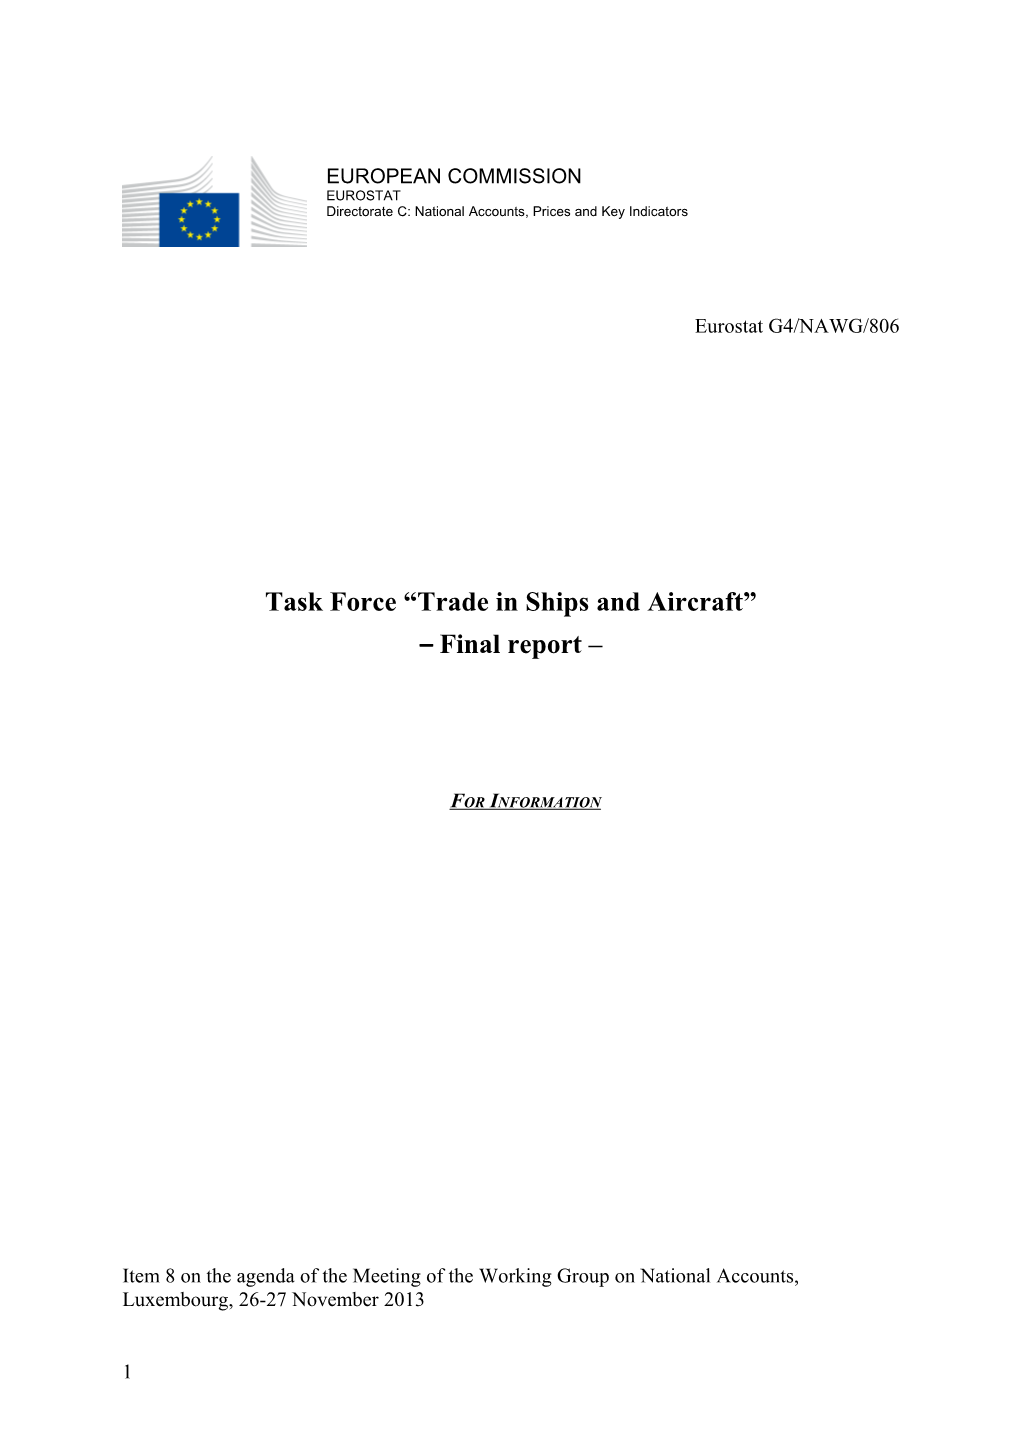 Task Force Trade in Ships and Aircraft